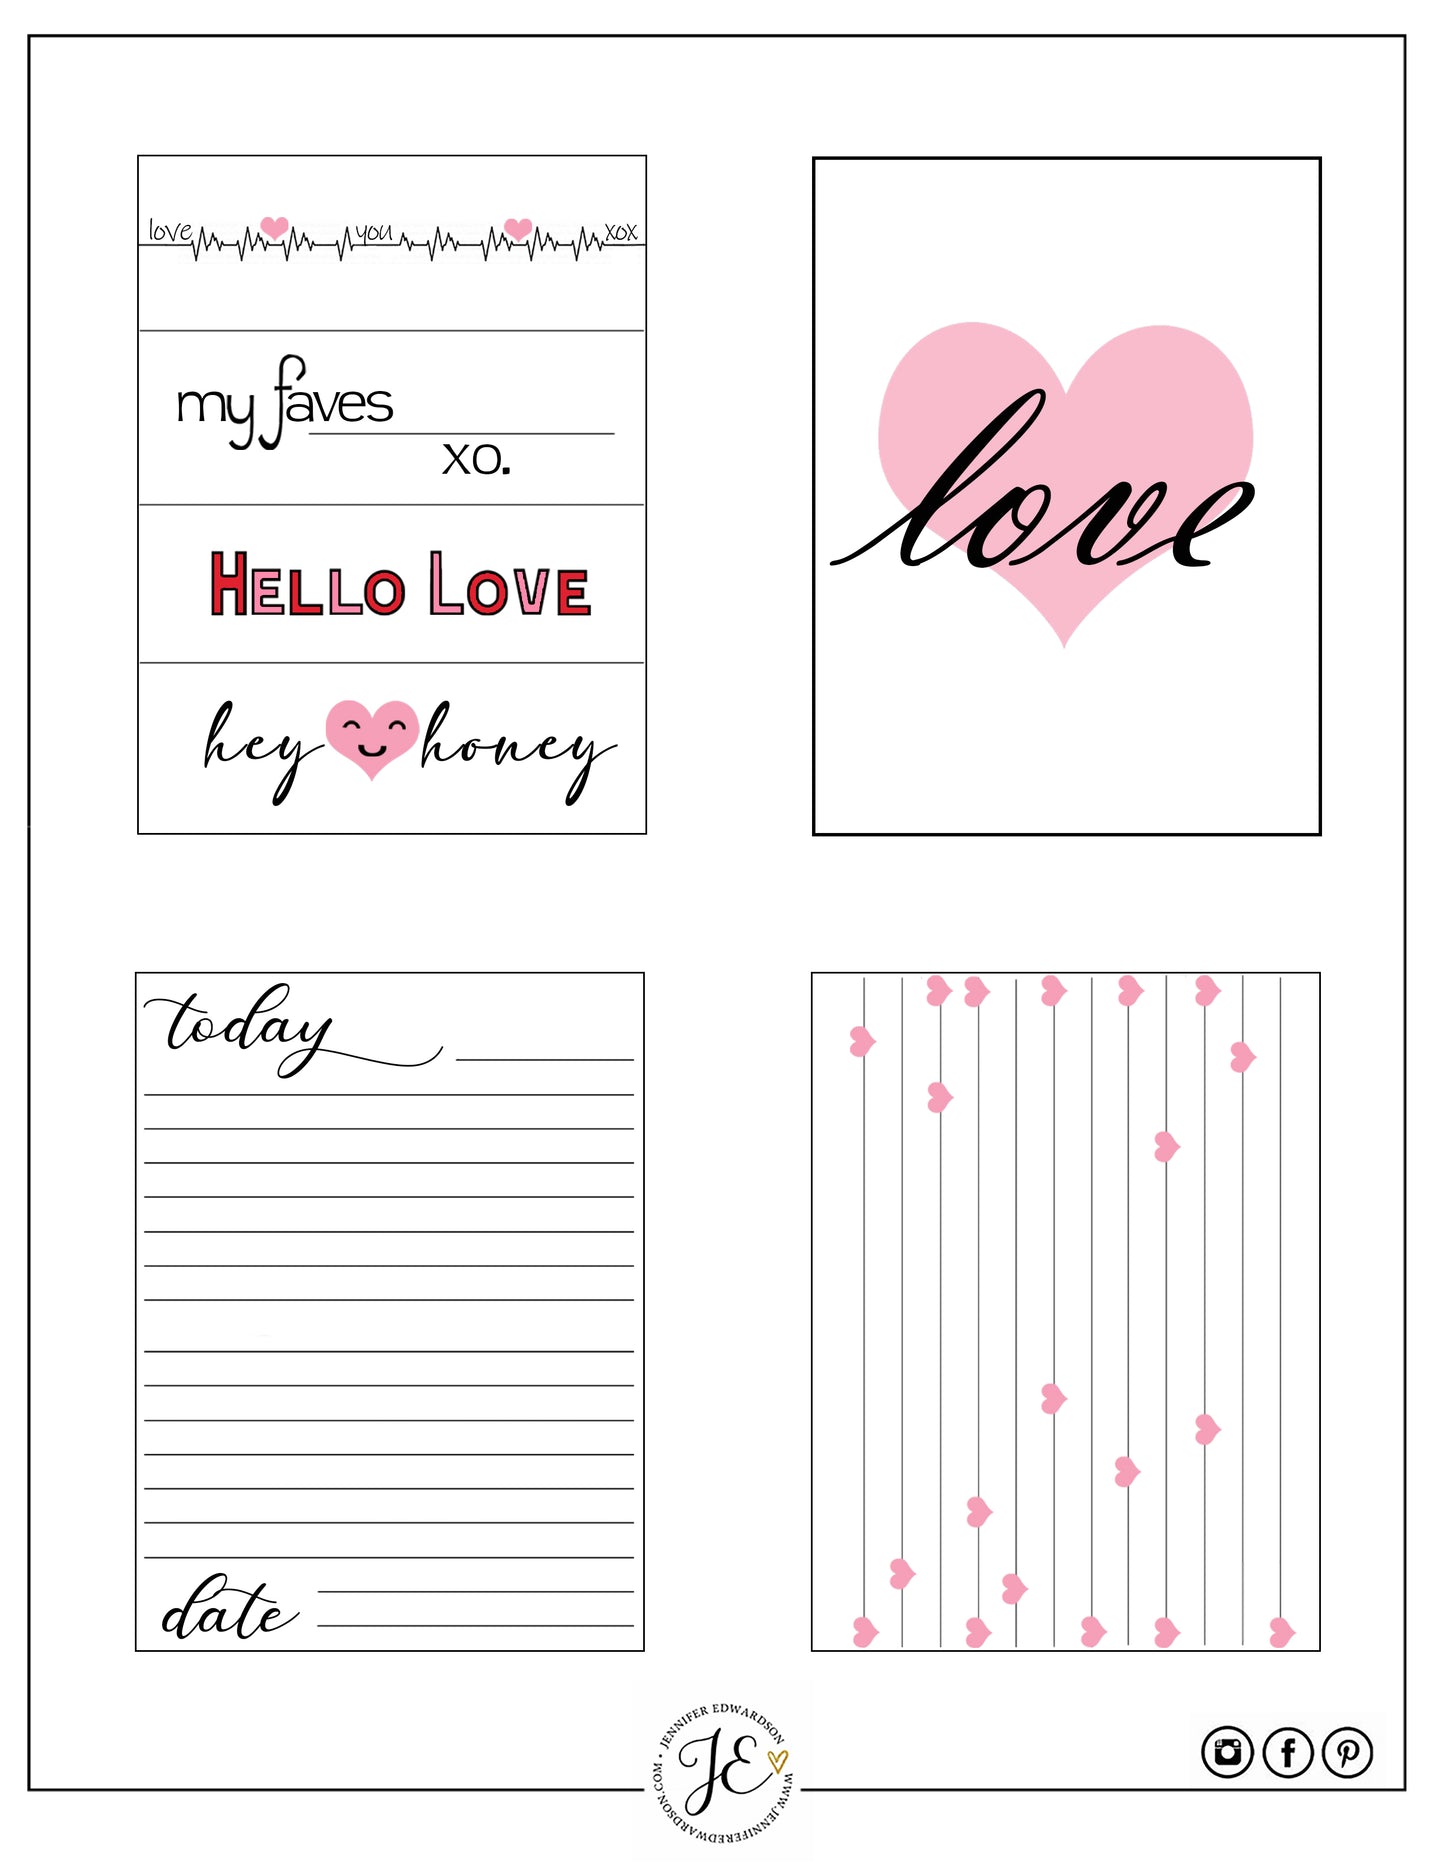 'Love You more' Journal Cards